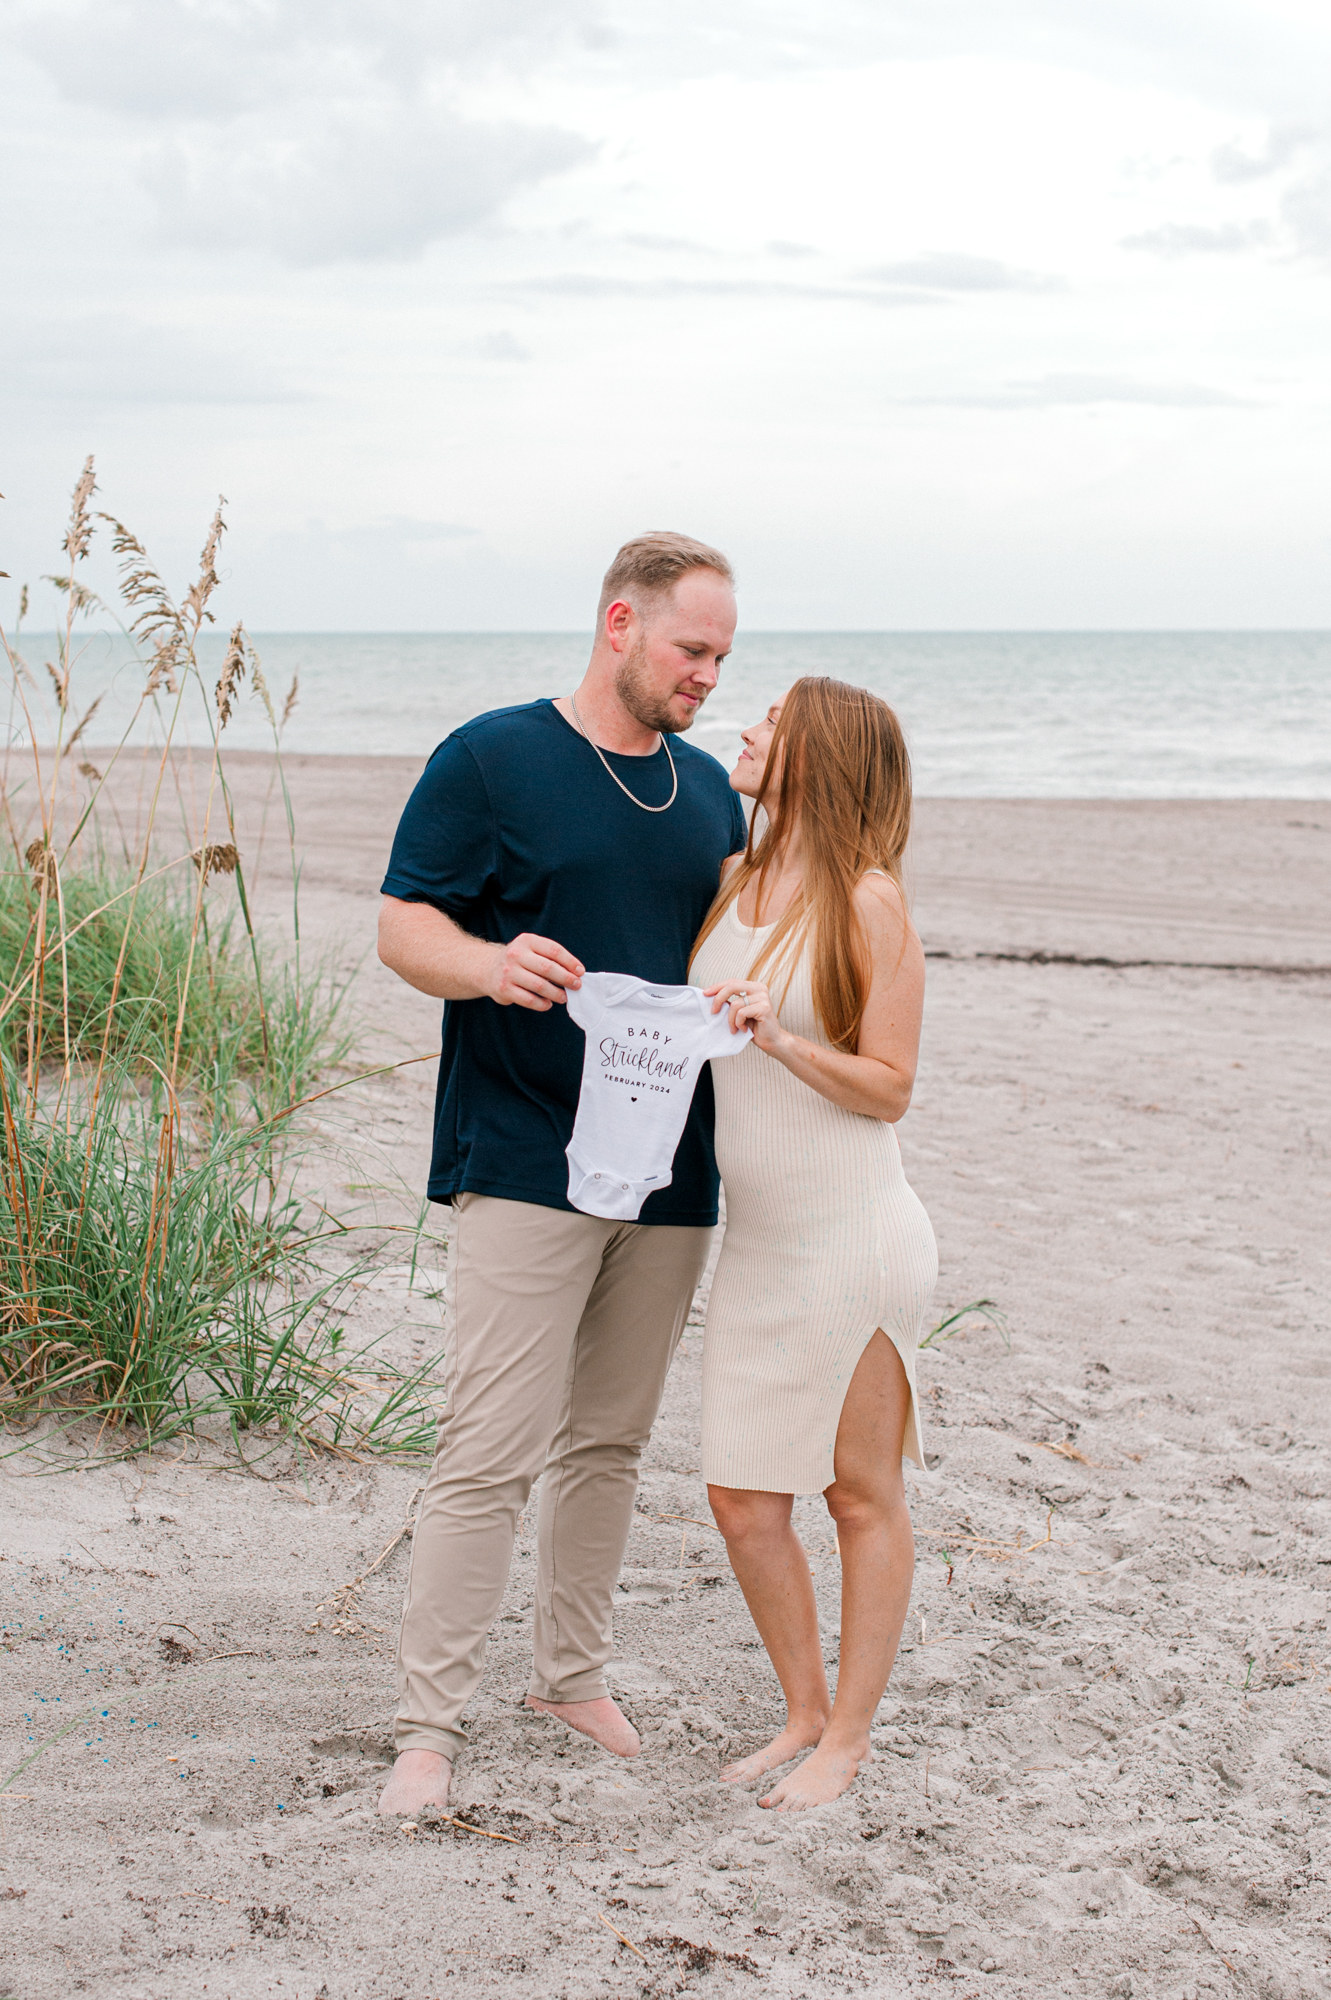 New parents stand near the dunes holding a baby onesie so they can announce to friends and family their exciting news. Orlando Prenatal Massage